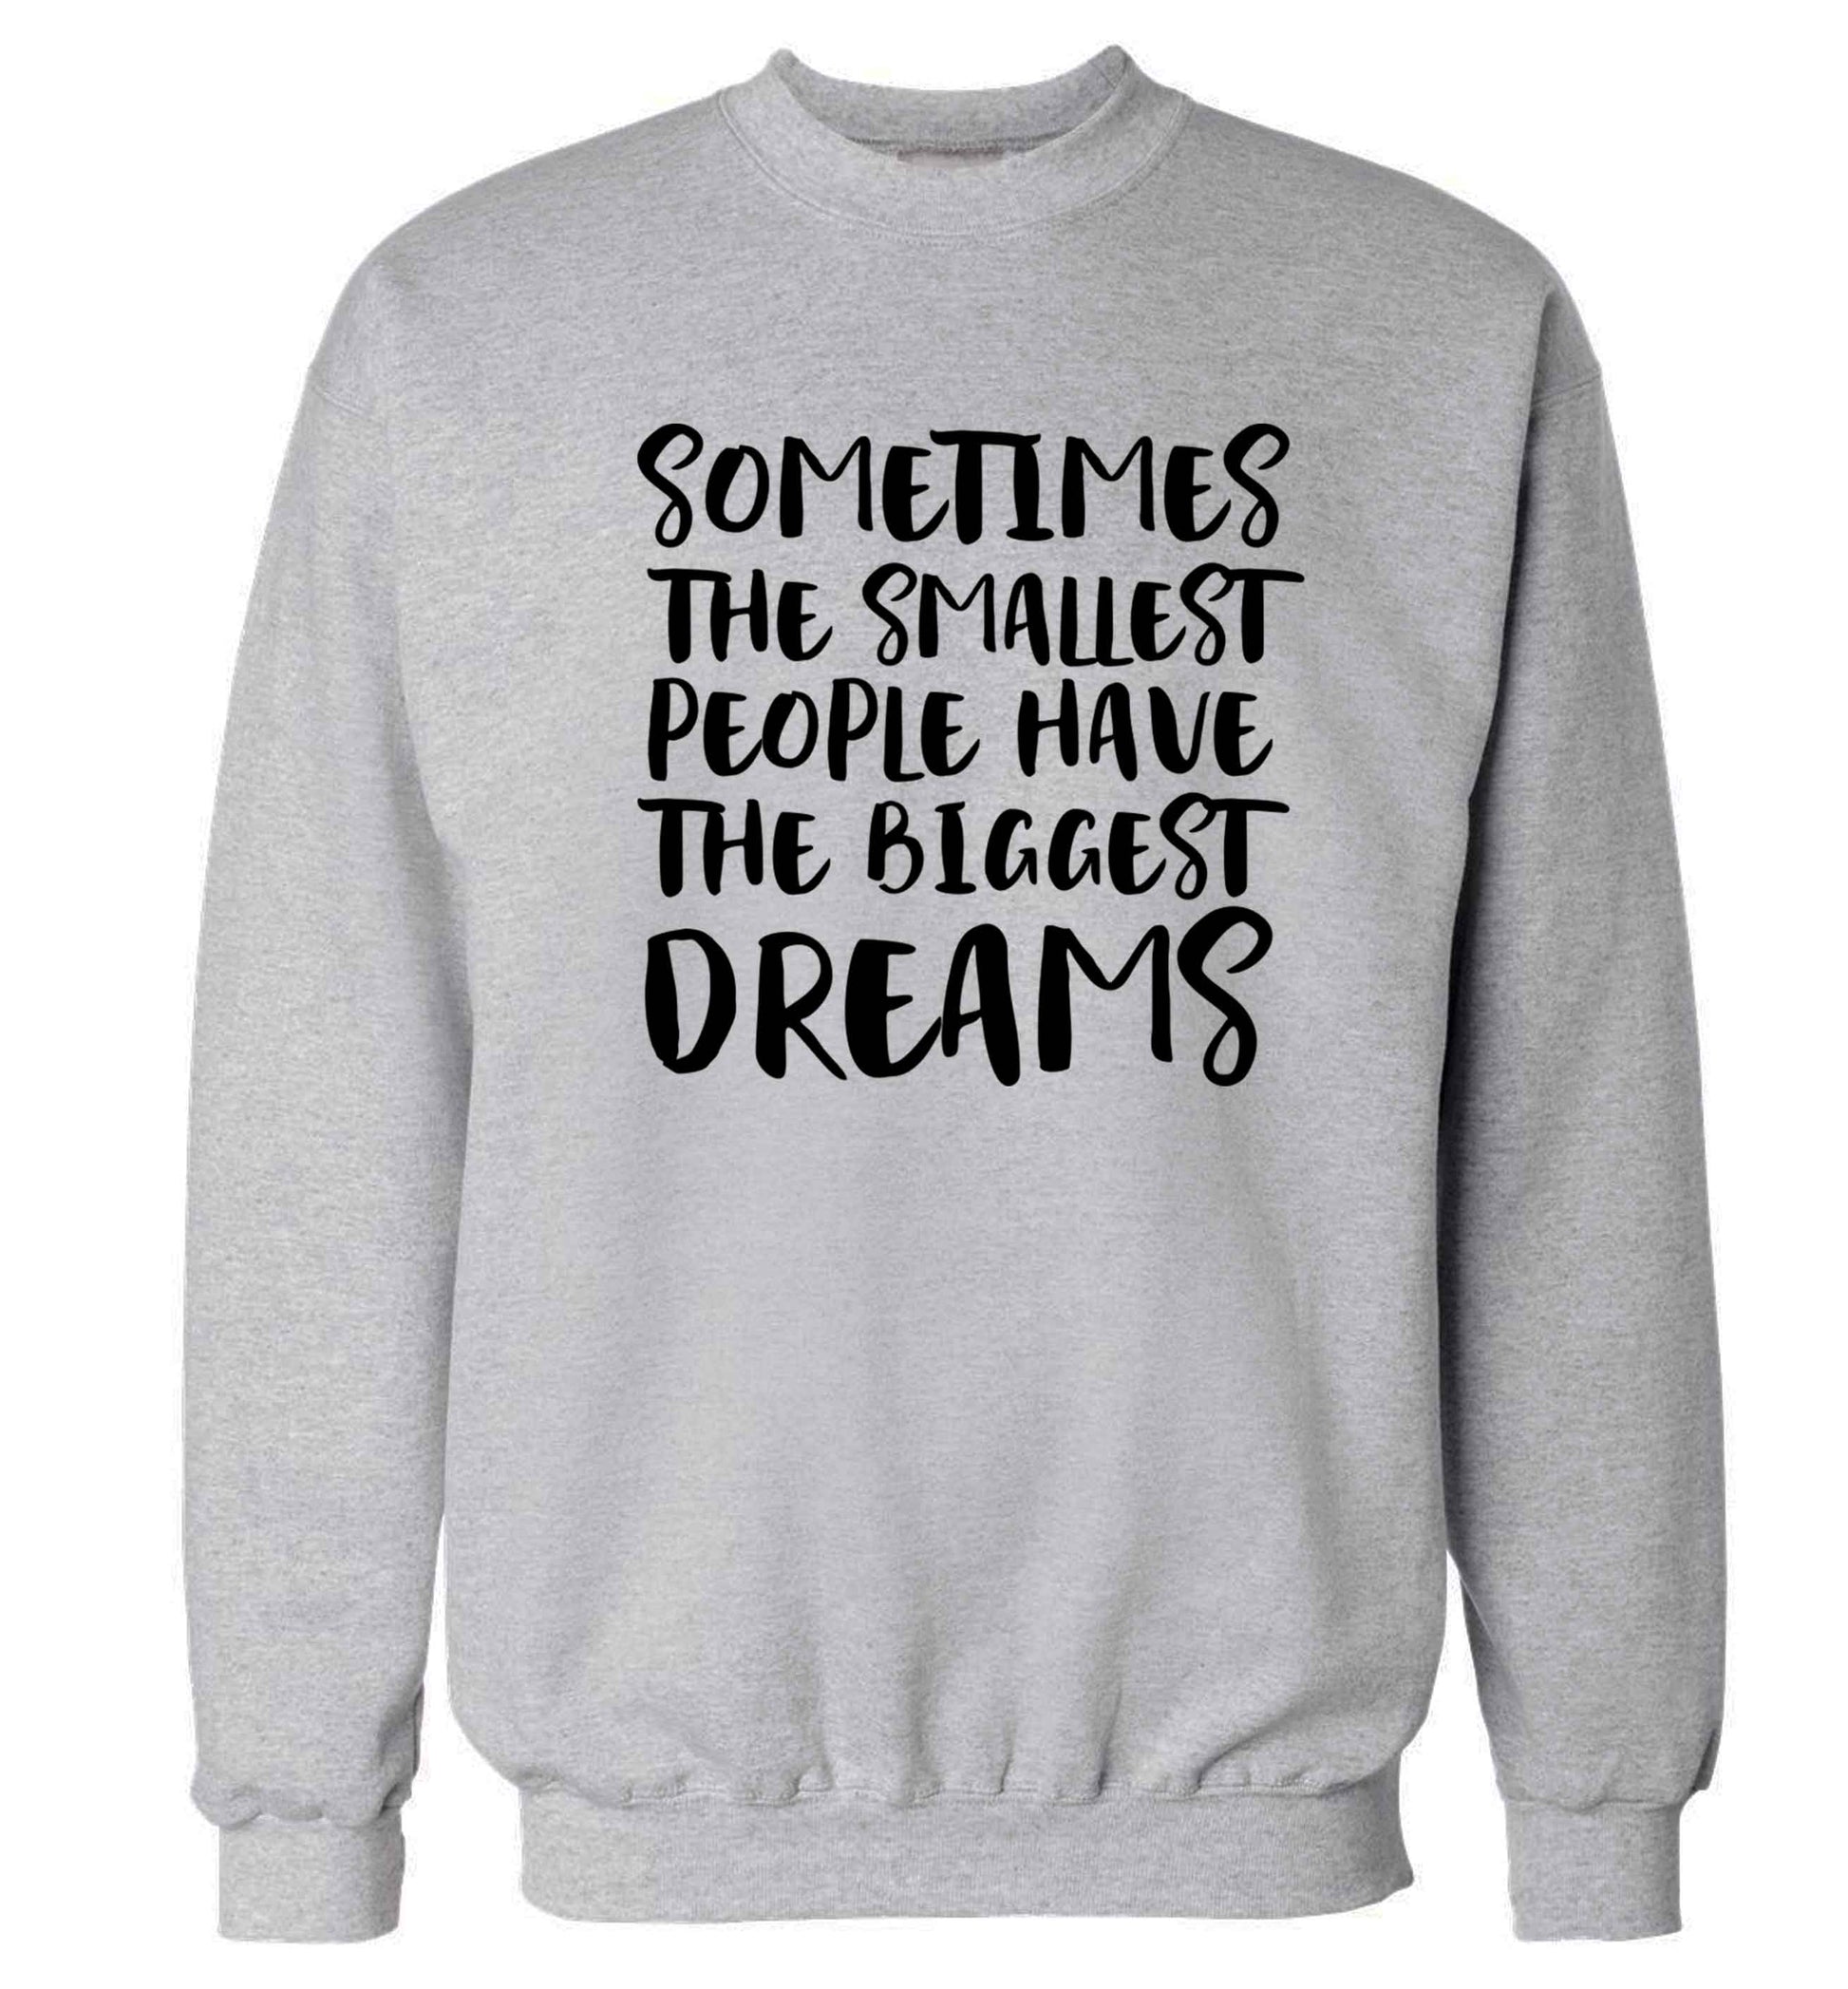 Sometimes the smallest people have the biggest dreams Adult's unisex grey Sweater 2XL